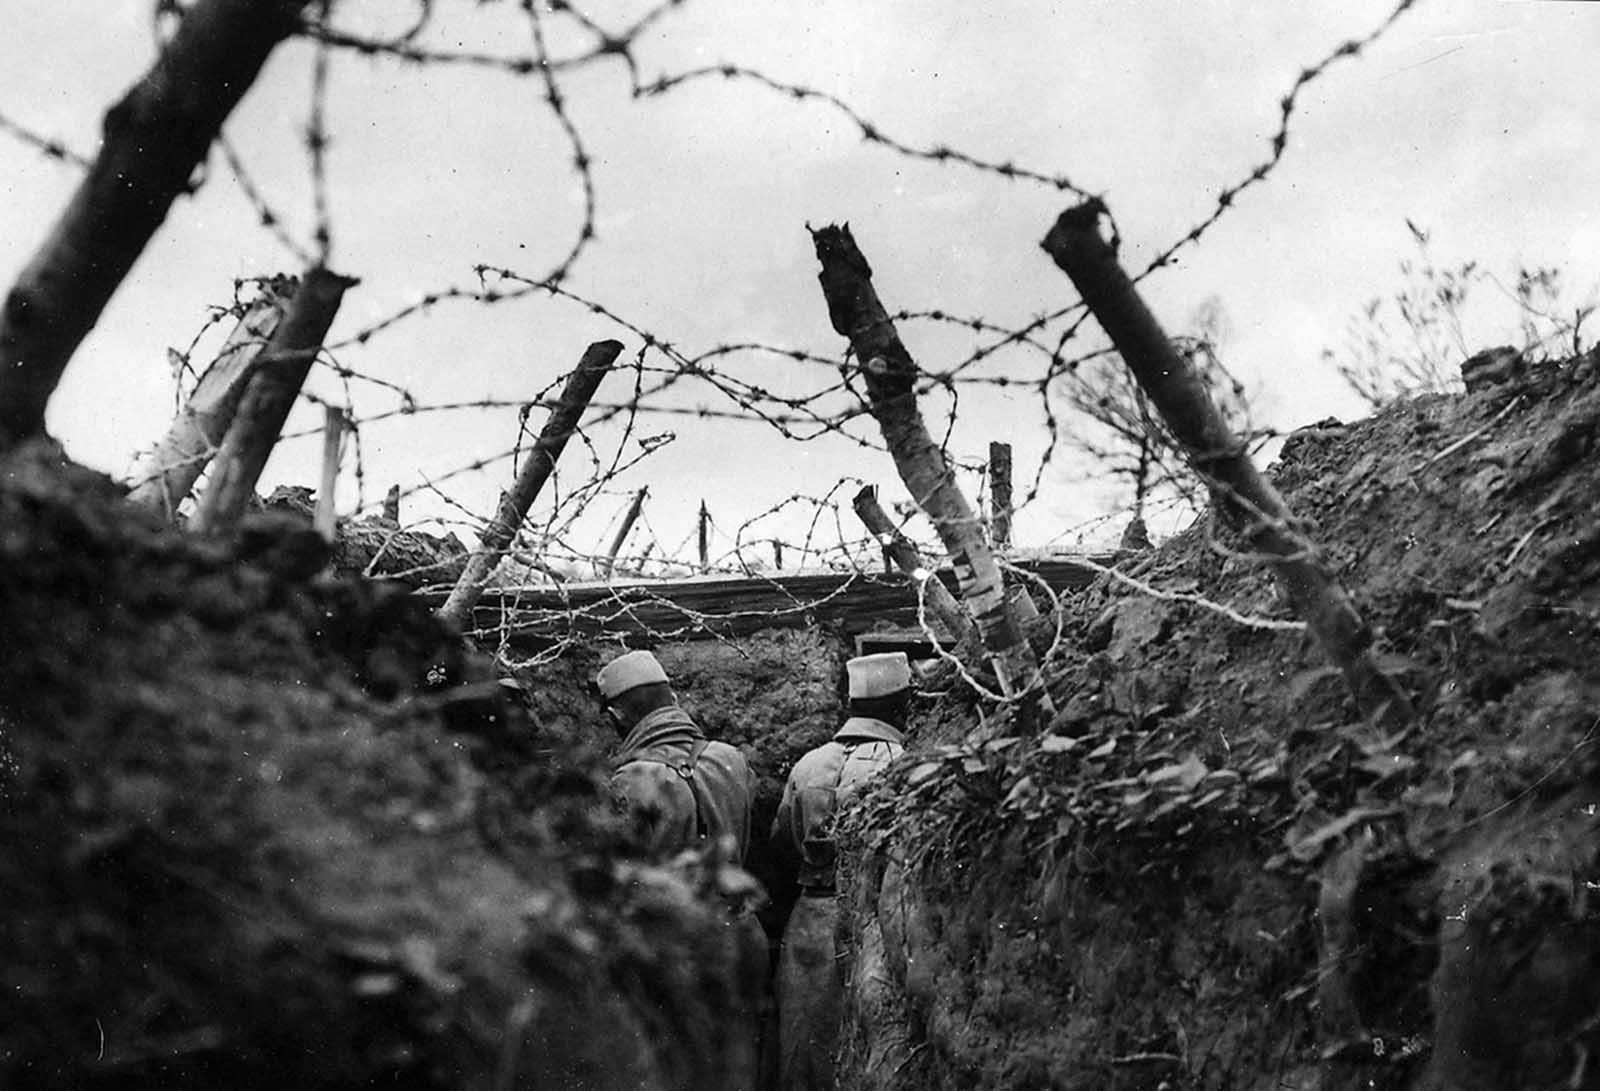 French lookouts posted in a barbed-wire-covered trench. The use of barbed wire in warfare was recent, having only been used for the first time in limited form during the Spanish-American War. All sides in World War I used extensive networks of barbed wire entanglements to prevent ground troops from moving forward. The effectiveness of the wire drove the development of technologies like the tank, and wire-cutting explosive shells set to detonate the instant they made contact with a wire.